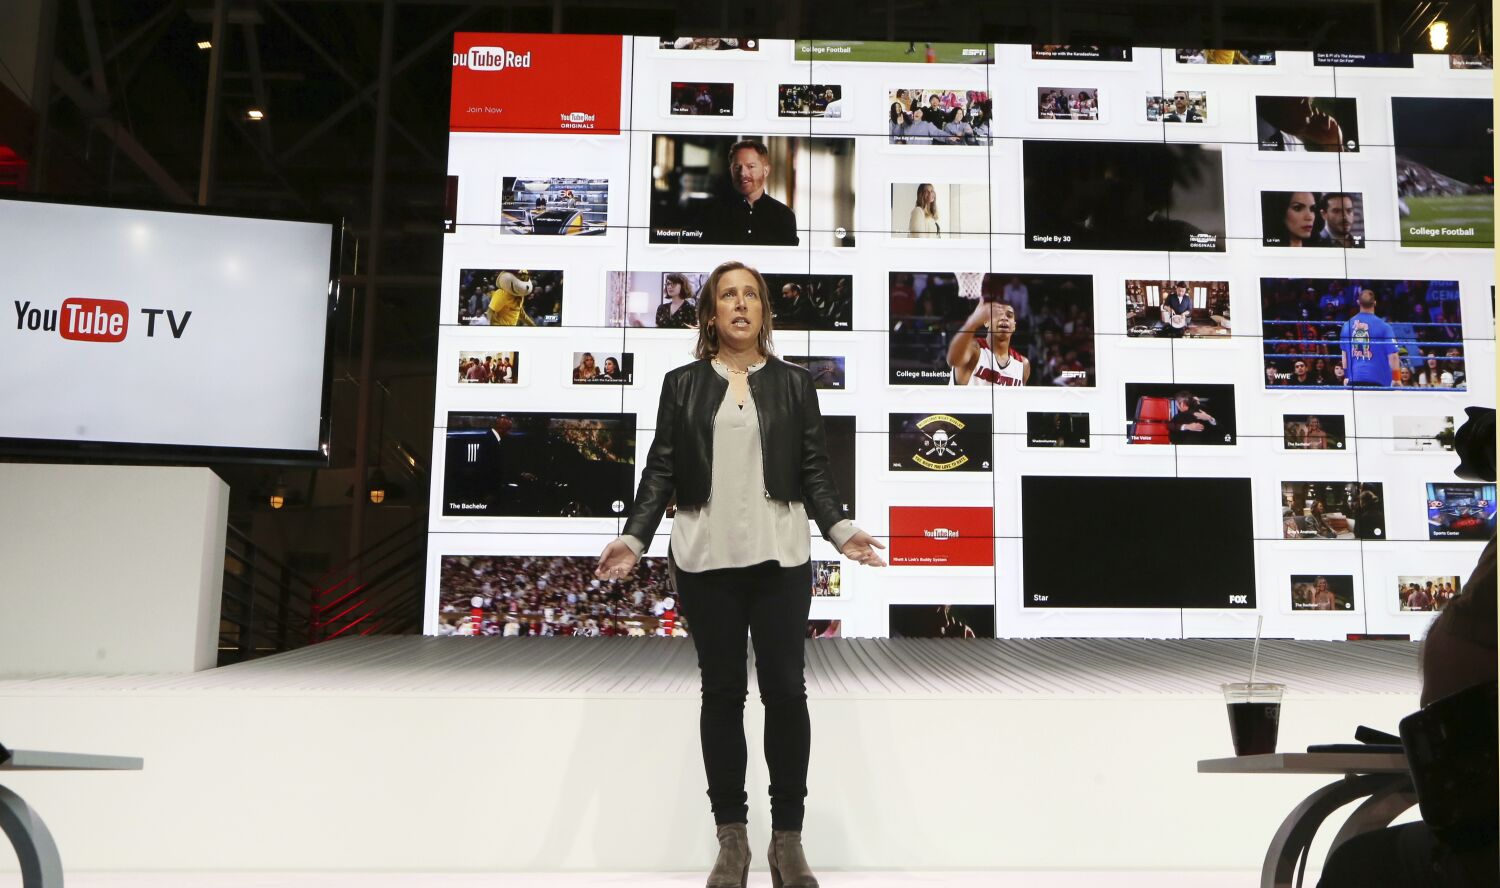 YouTube CEO Susan Wojcicki to step down amid tough moment for tech